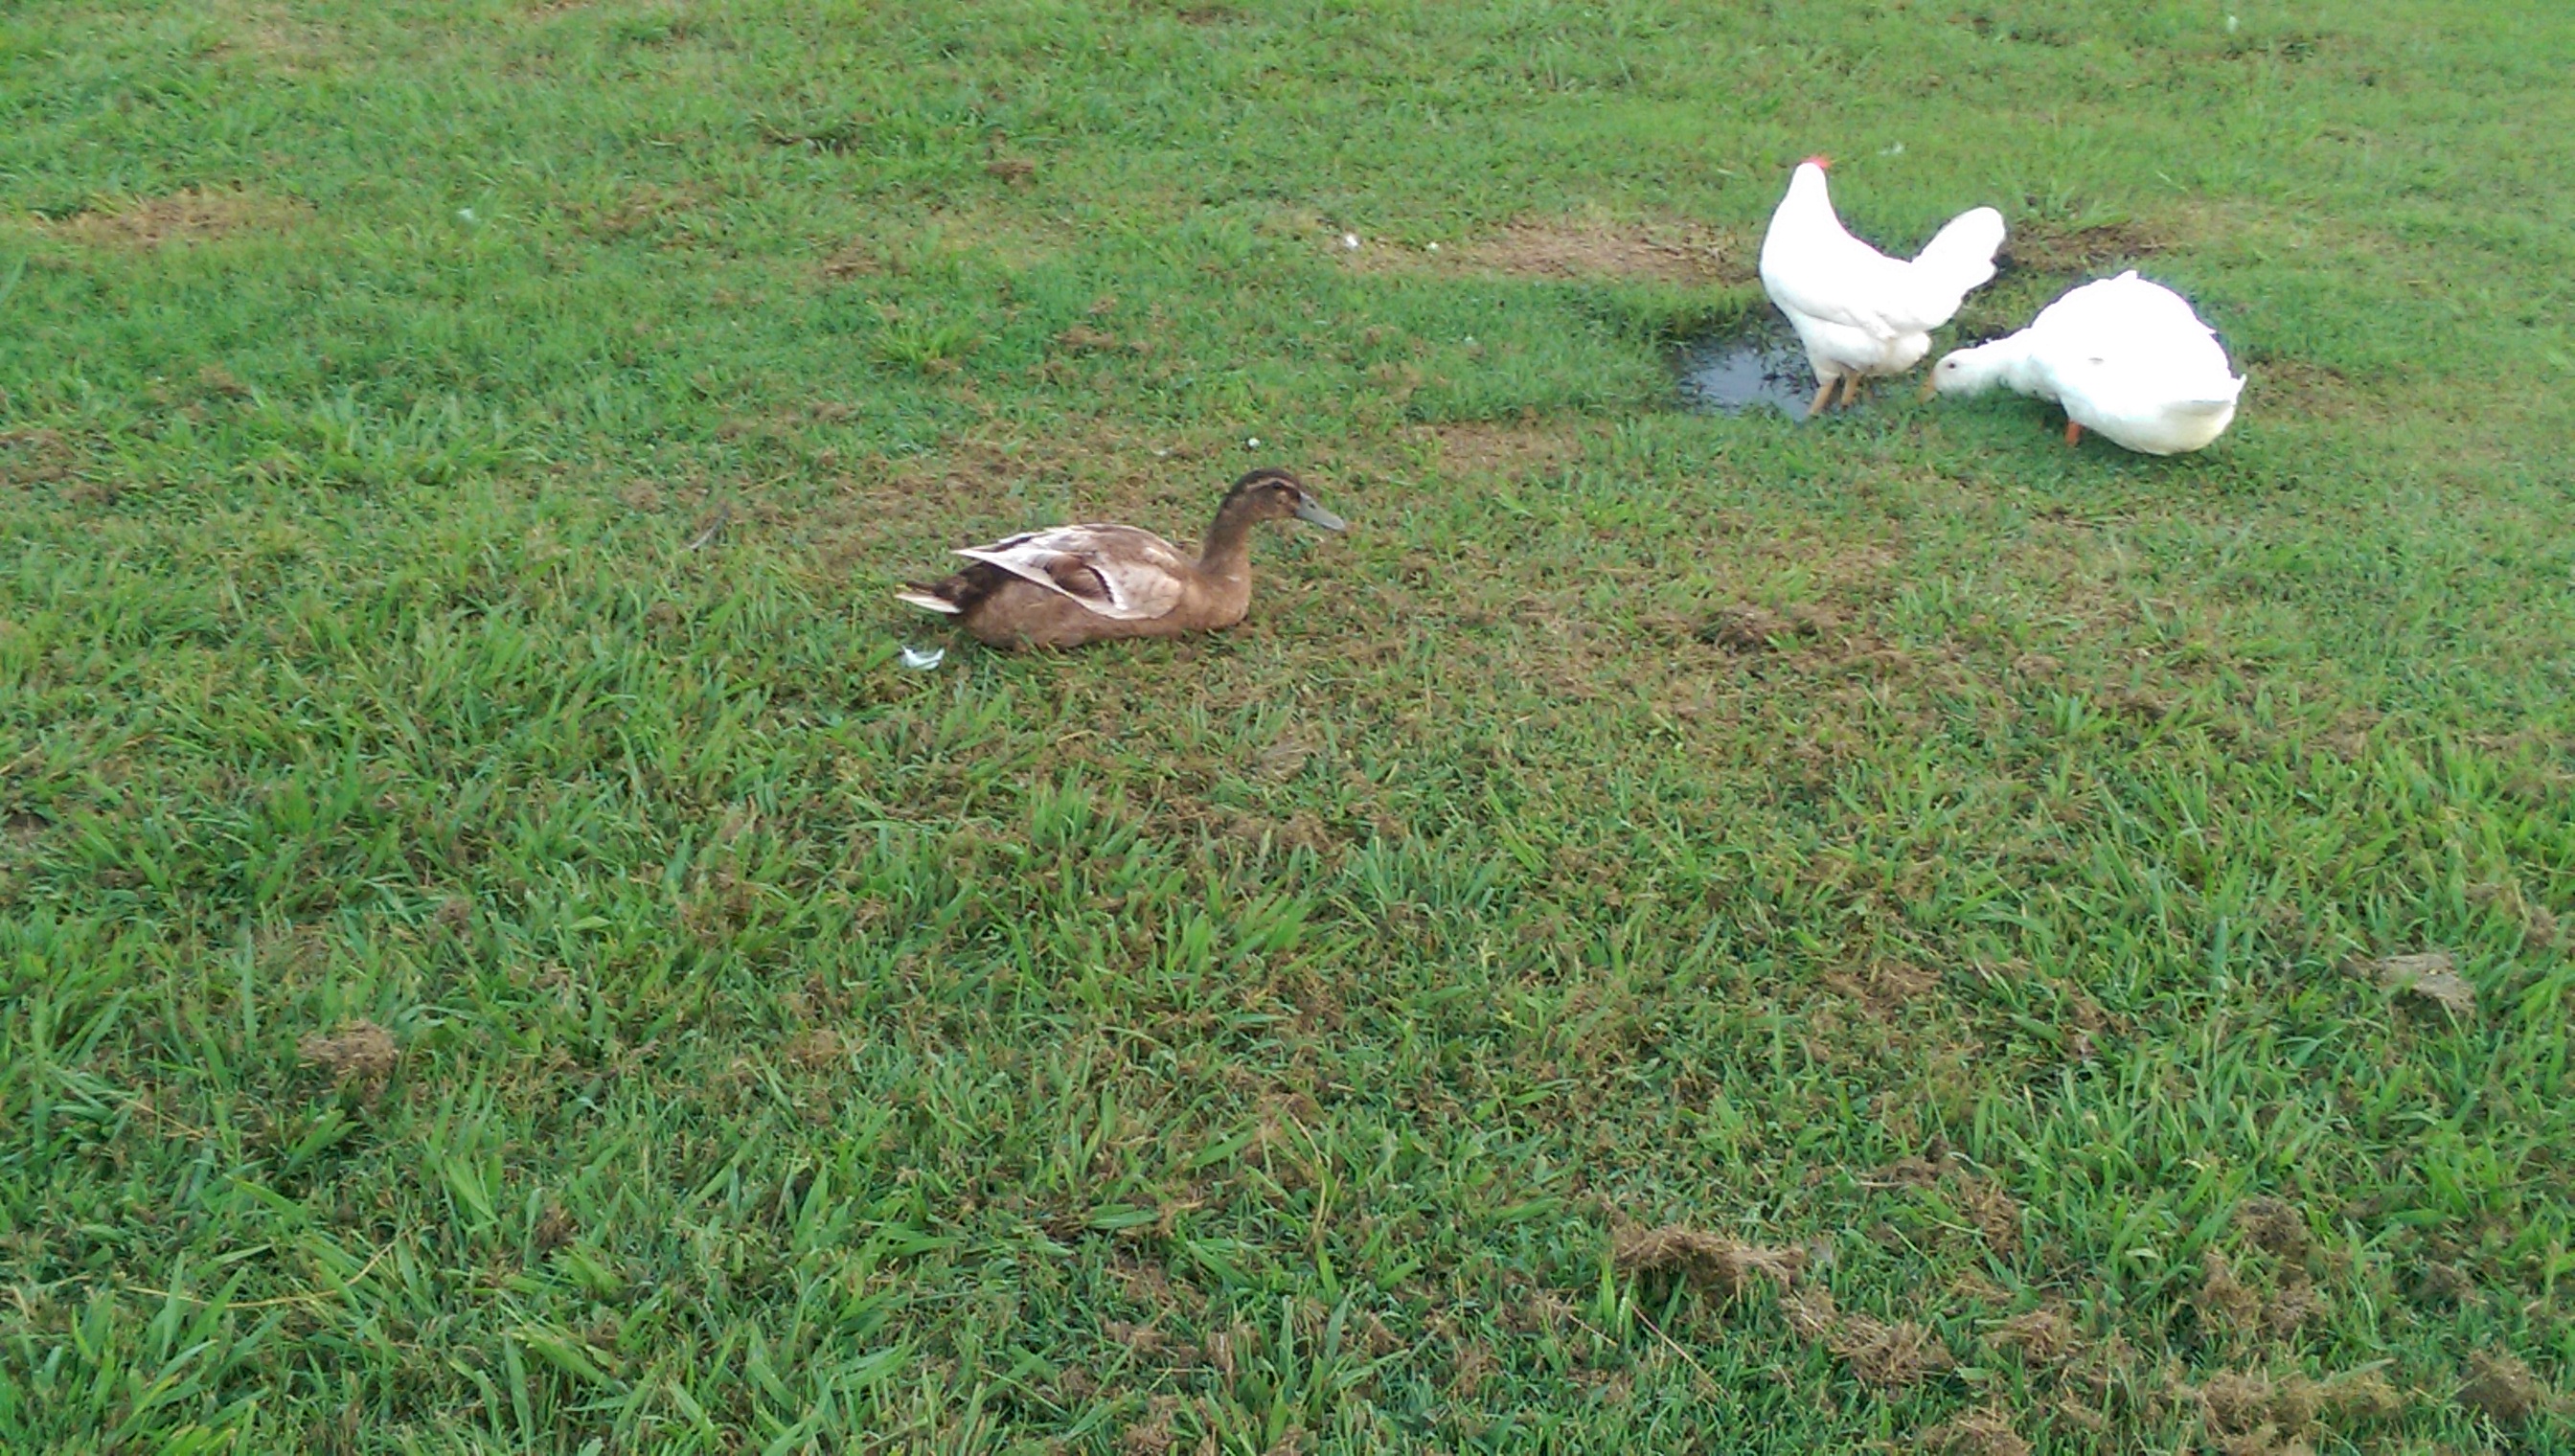 Our rescued ducks, Howard and No-no. Howard is the female. Don't laugh.